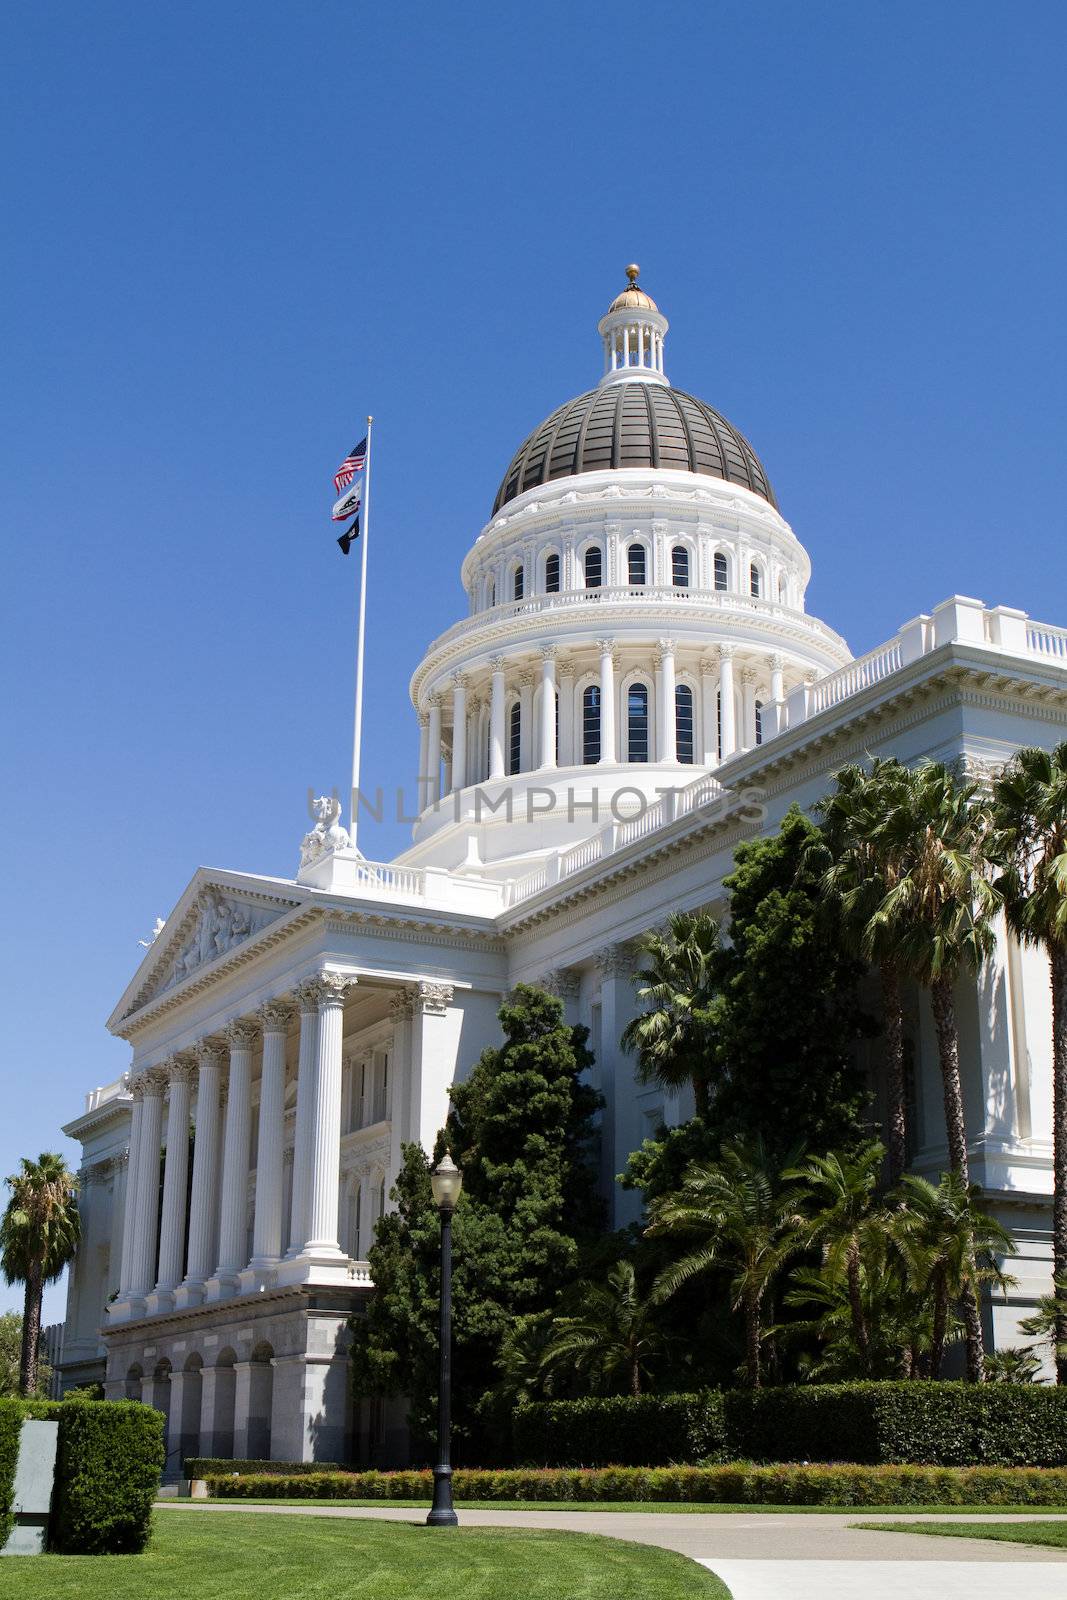 California state capitol building with dome located in Sacramento, CA.